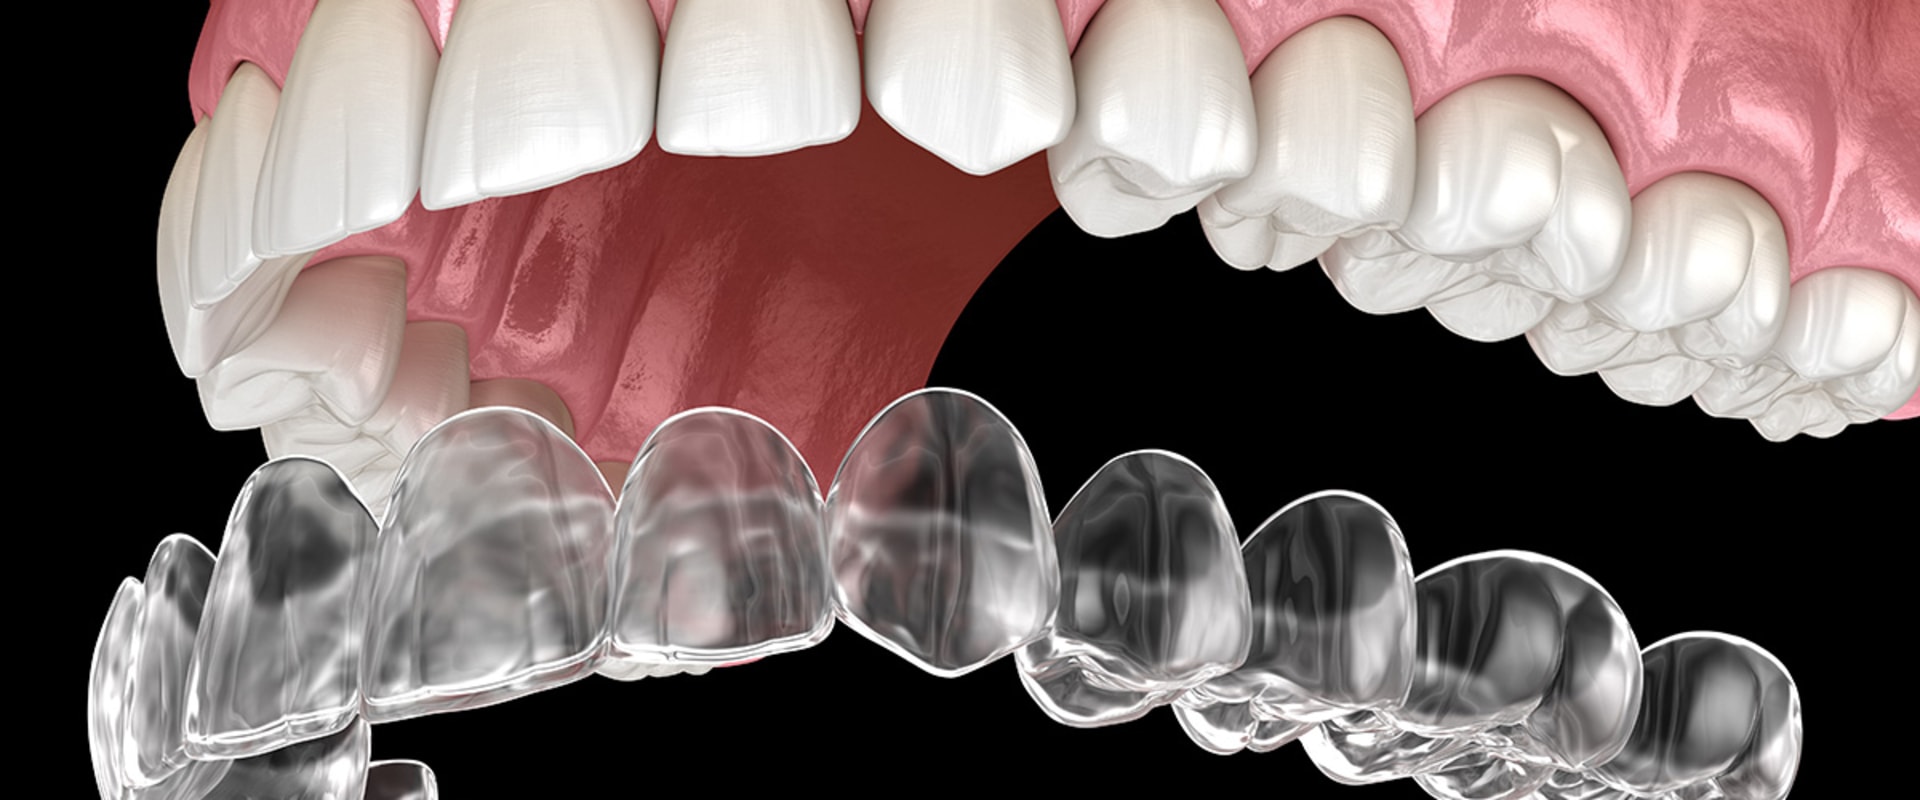 Why is invisalign more expensive?